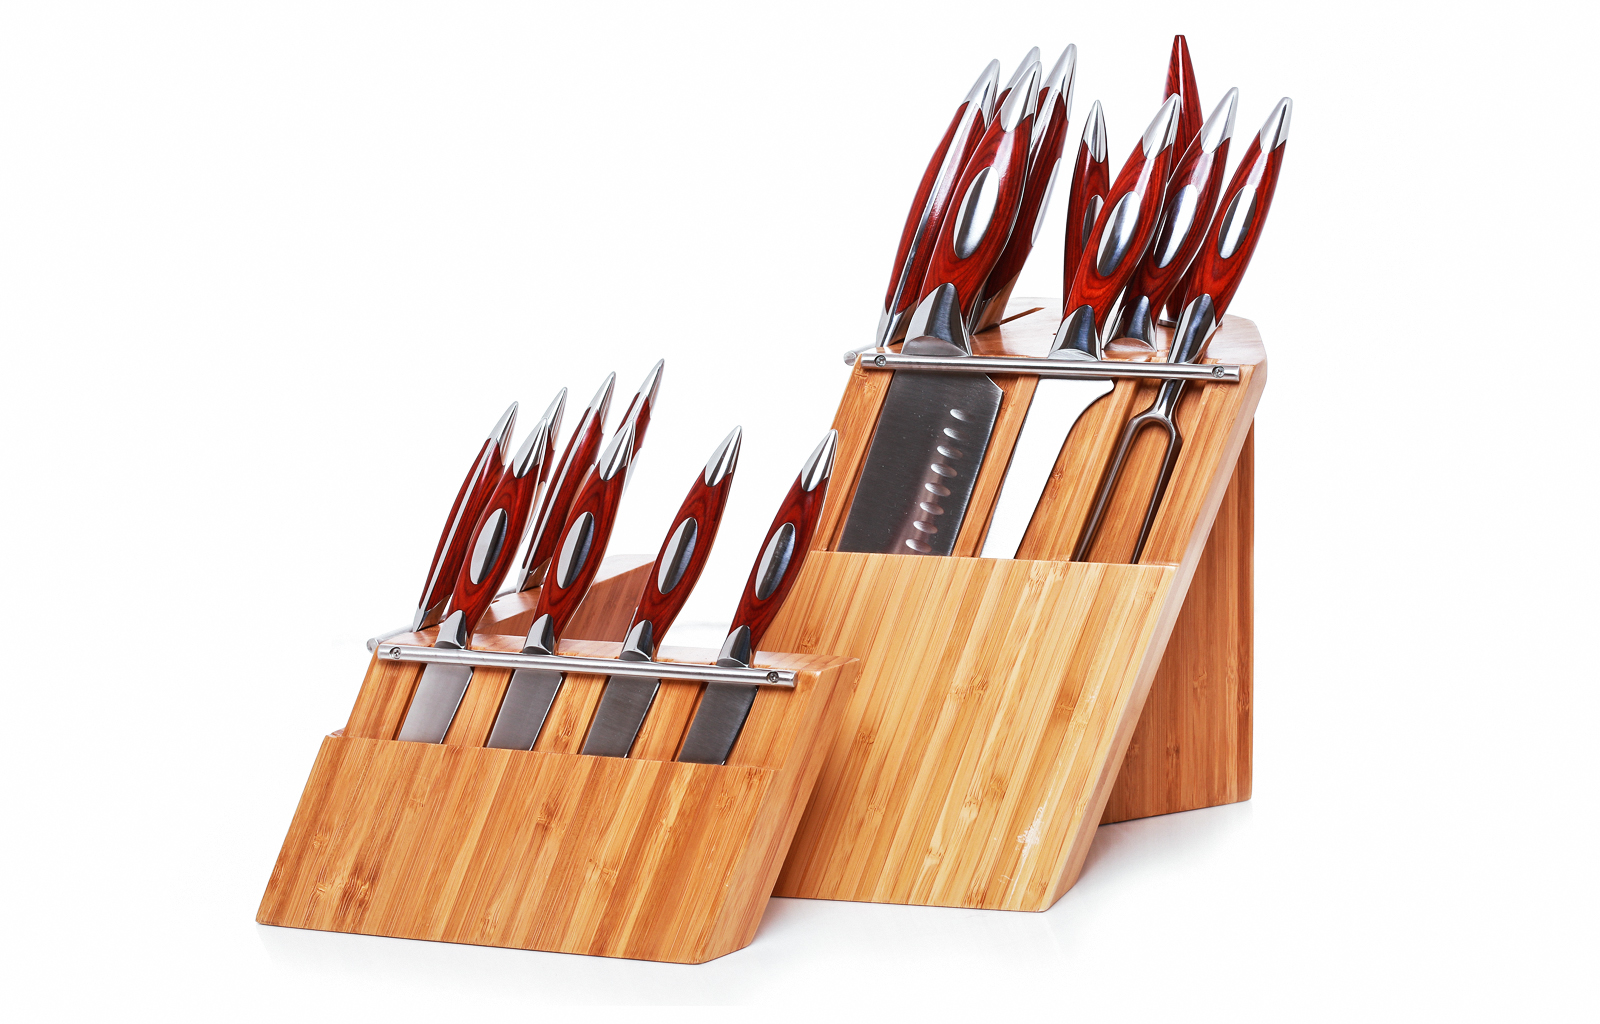 Colorful Knife Block